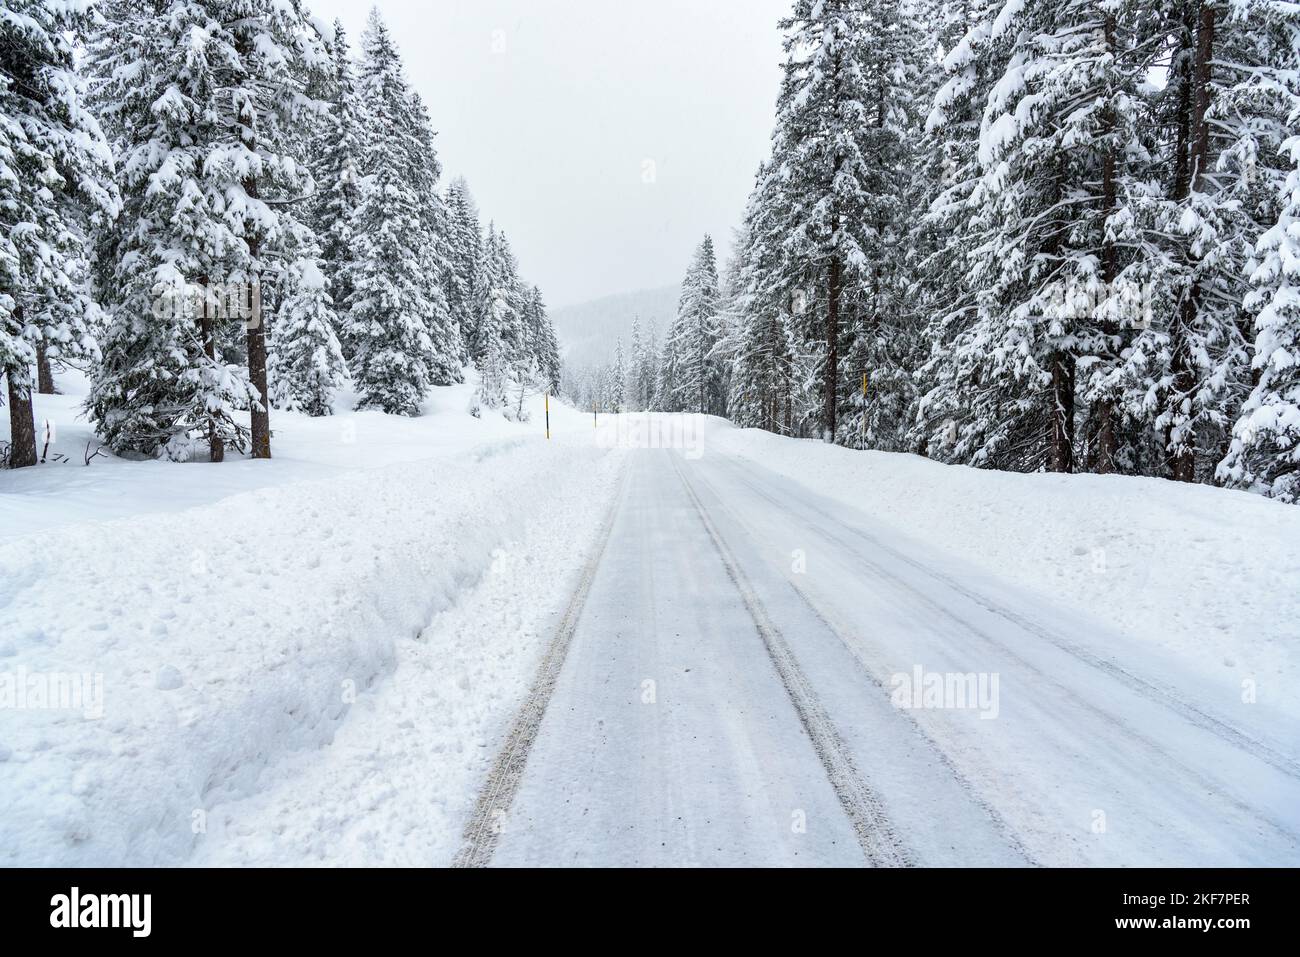 Deserted mountain road through a snowy forest during a heavy snowfall in winter Stock Photo